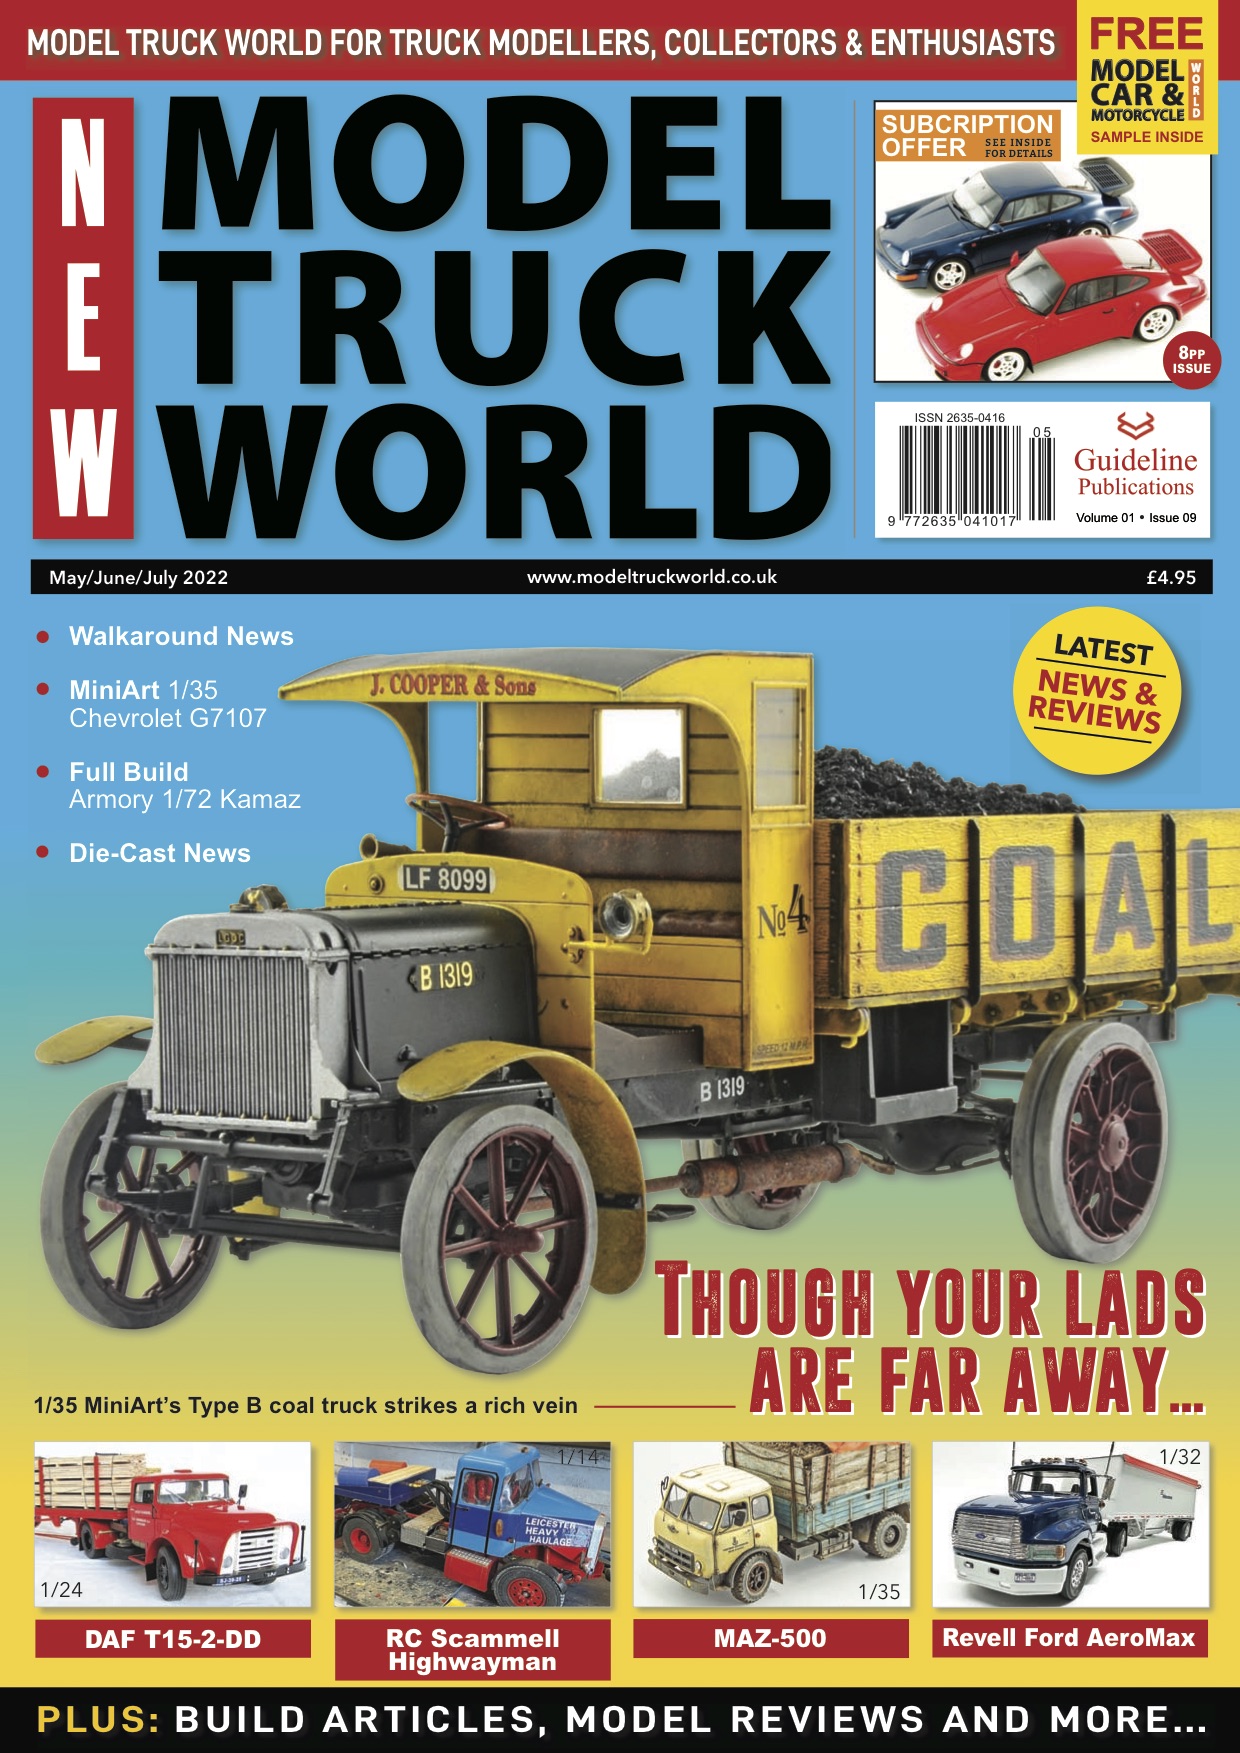 Guideline Publications New Model Truck World  Issue 09 